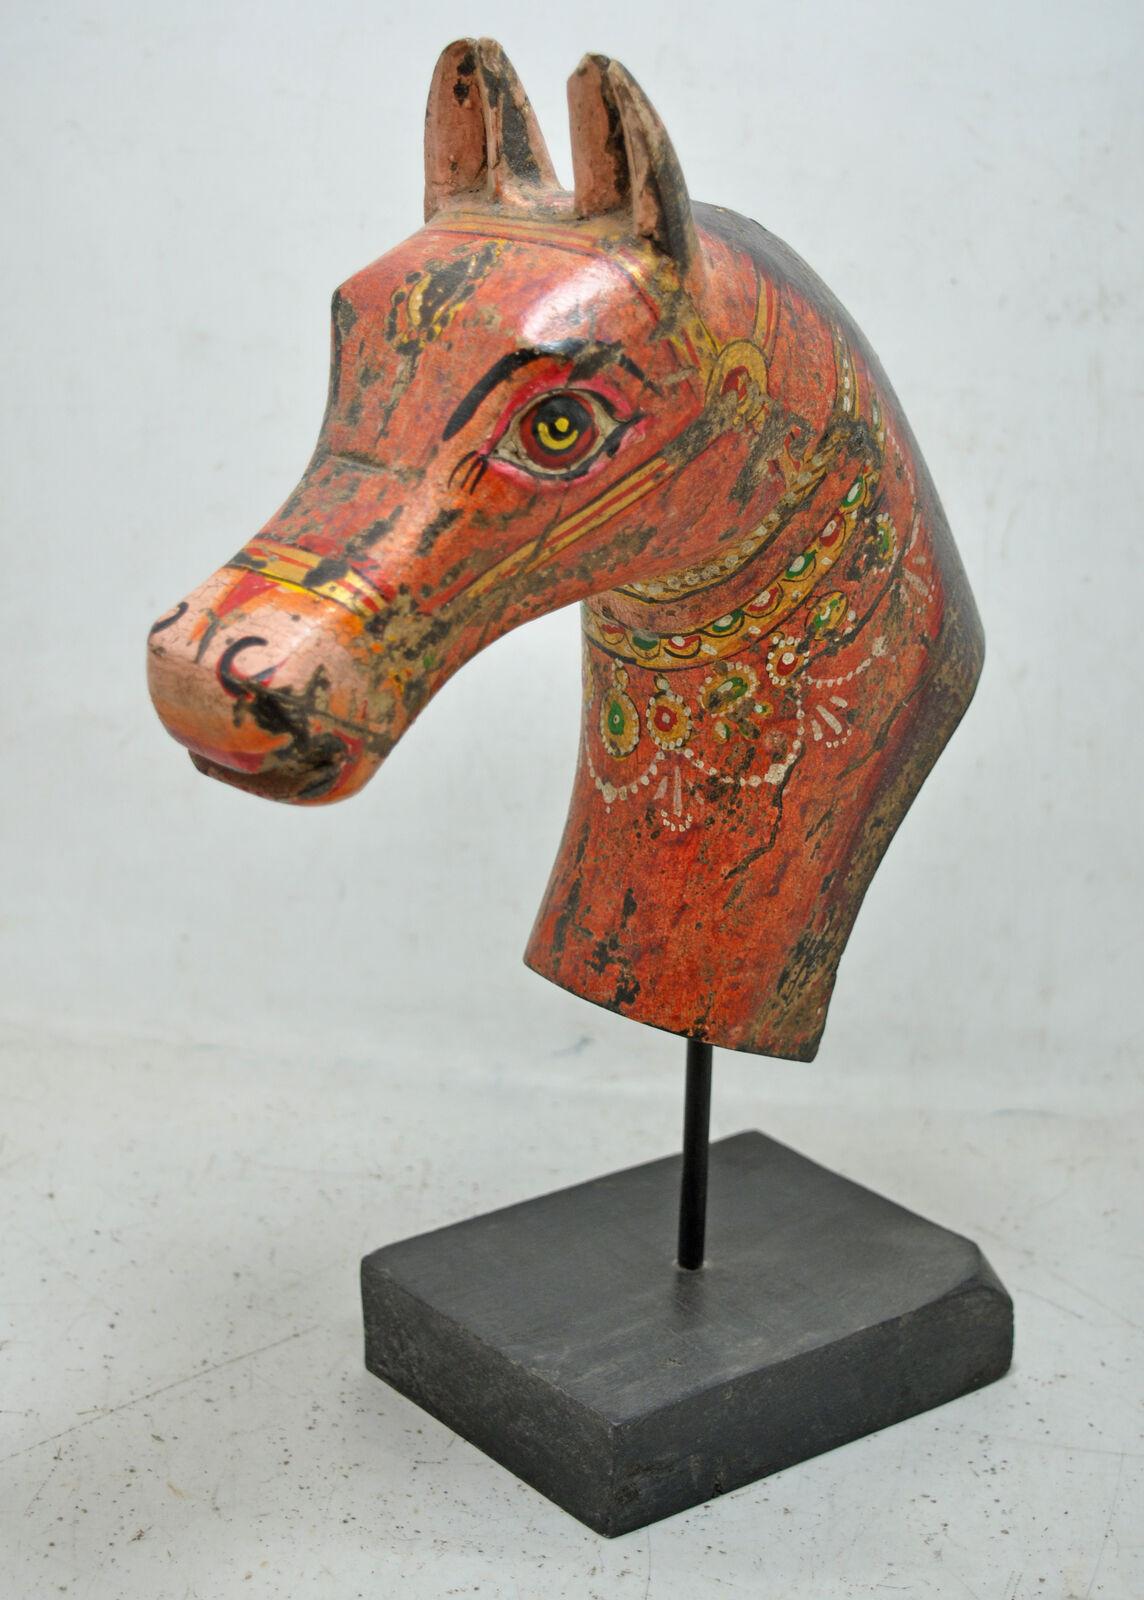 Primitive Hand-Carved and Painted Antique South Asian Folk Art Wooden Sculptural Horse Bus